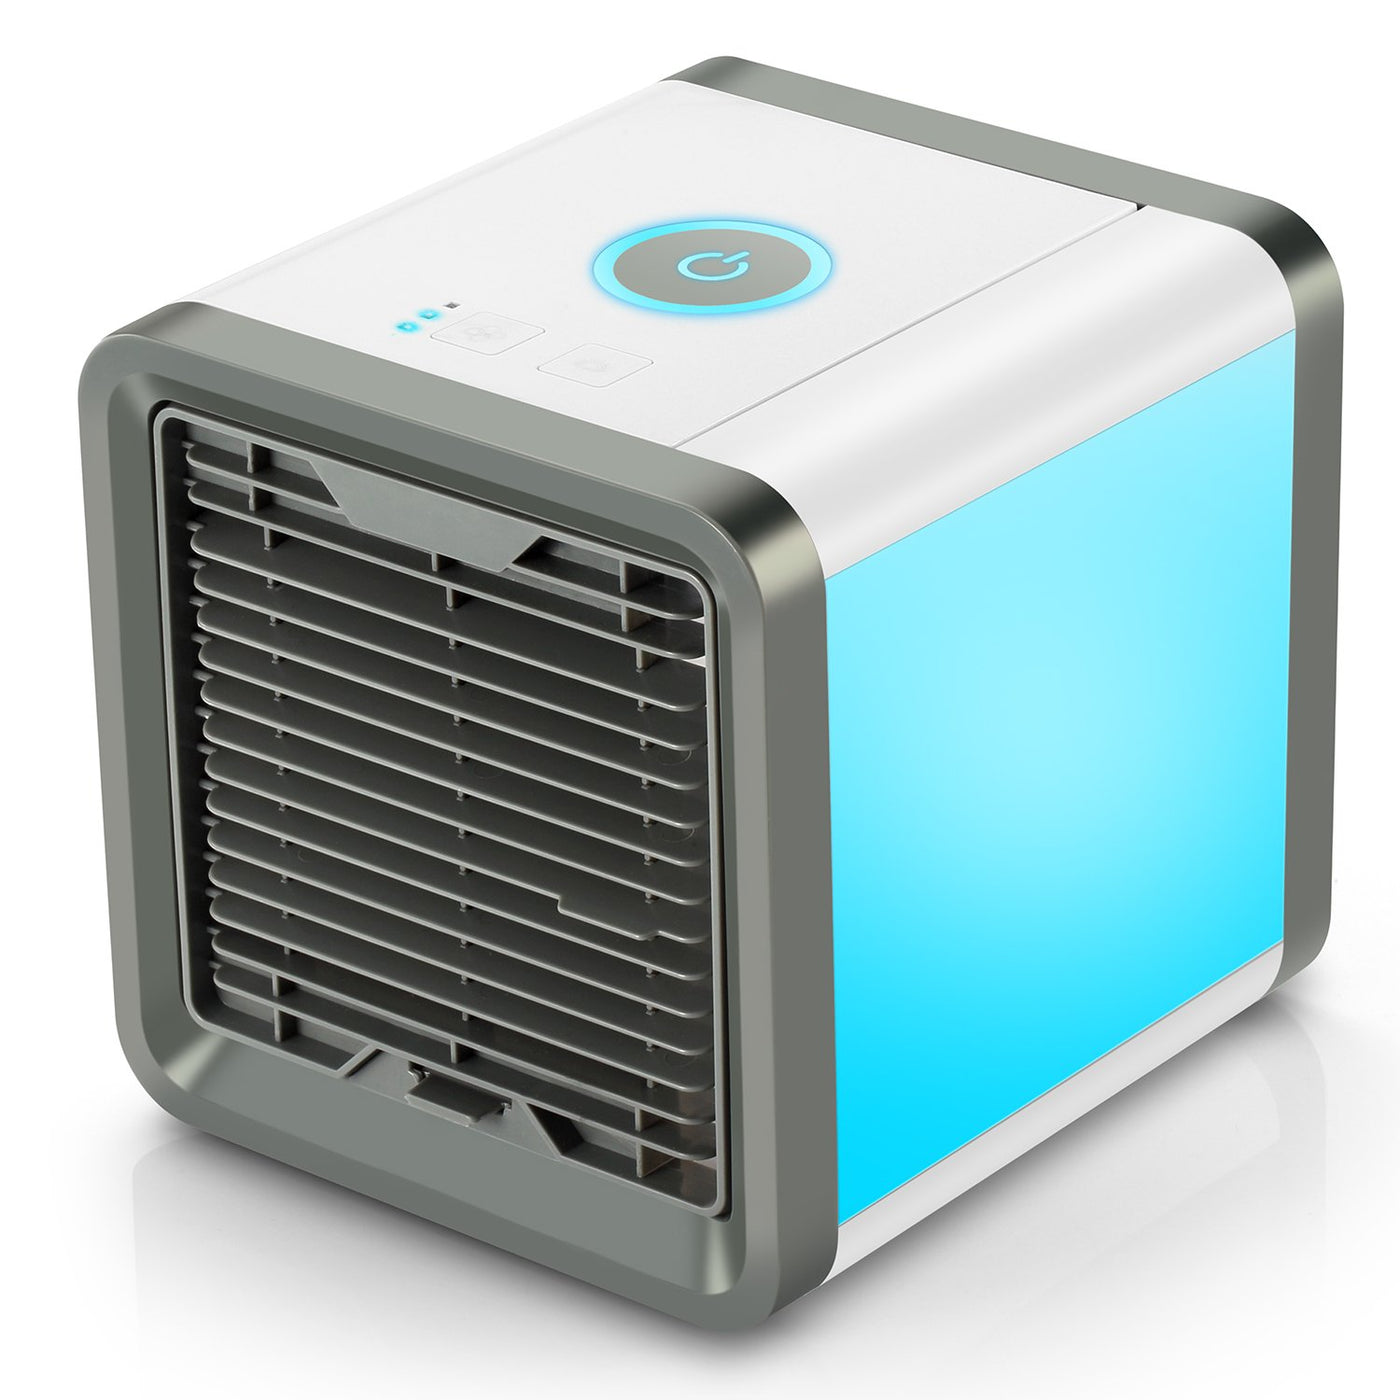 Birsppy Mini Air Conditioner Portable Desktop Air Cooler with 3 Speeds 3  Humi 755871559125